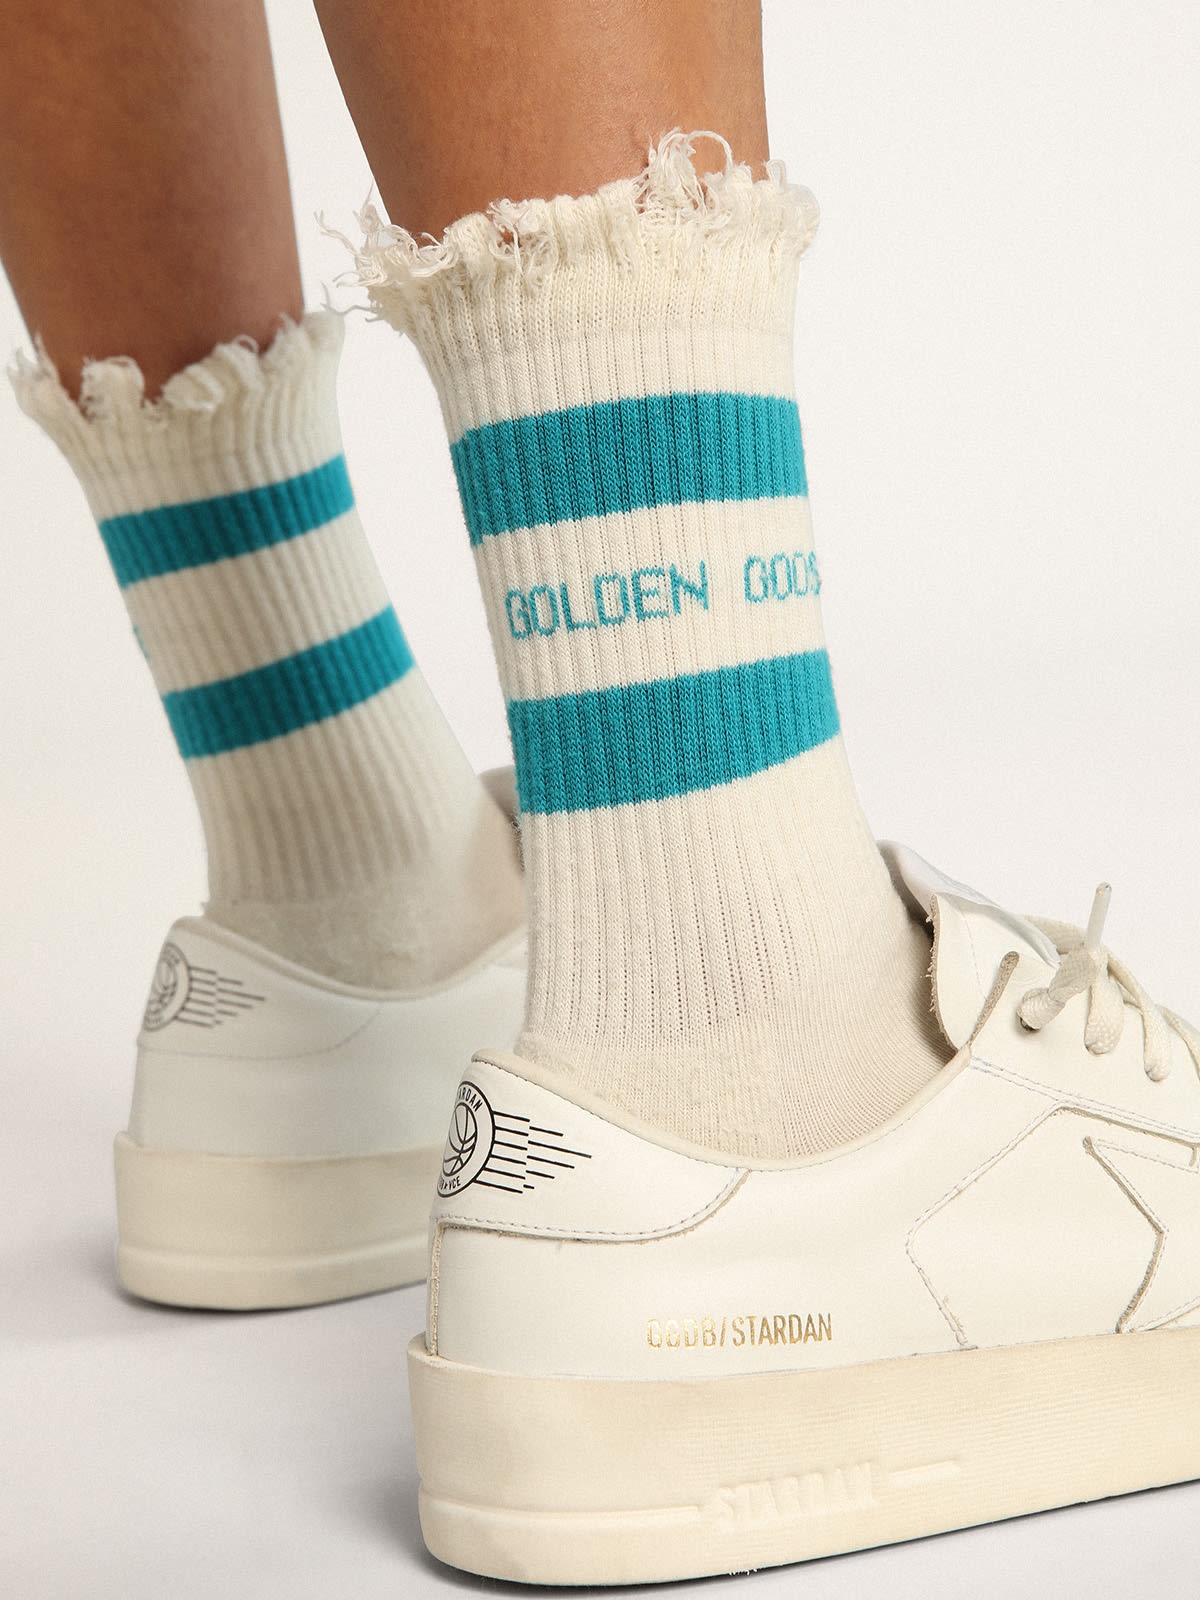 Distressed-finish white socks with turquoise logo and stripes - 3